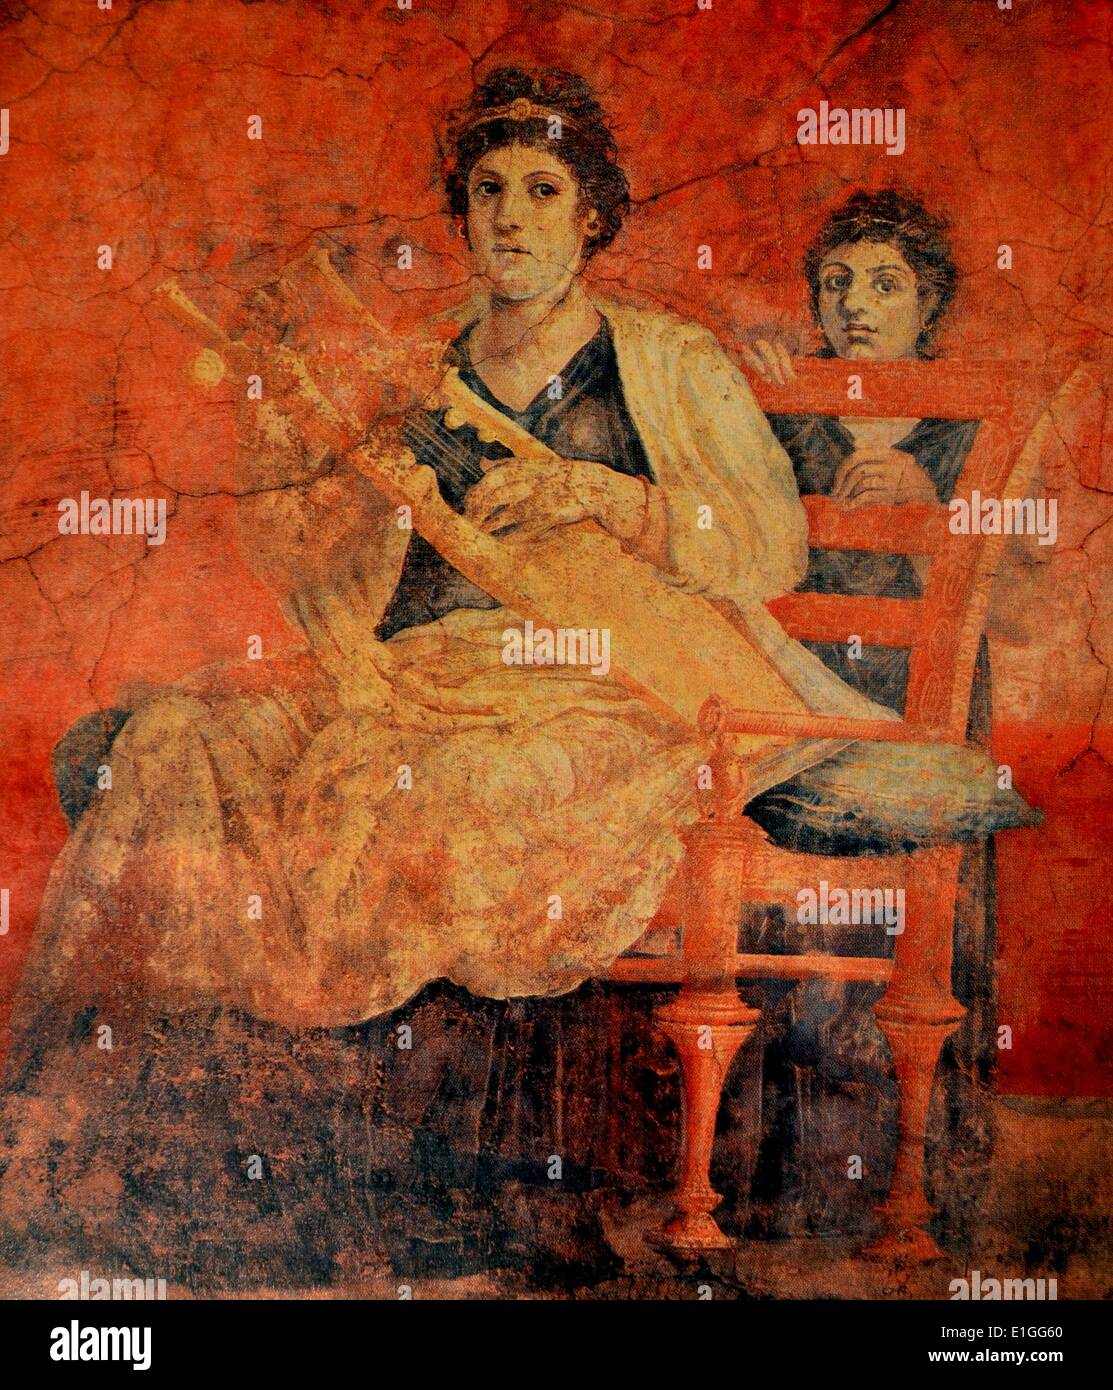 A Roman fresco, discovered in Pompeii, depicits a woman seated on a bronze chair, with a back, playing a Greek musical instrument called a Kithara. Chairs with a back for the Romans was a symbol of dignity or respect, reserved for high officials or woman of rank (the ceremonial use of thrones a vestige of this tradition) such as the woman in this fresco. Dated 50 B.C. Stock Photo